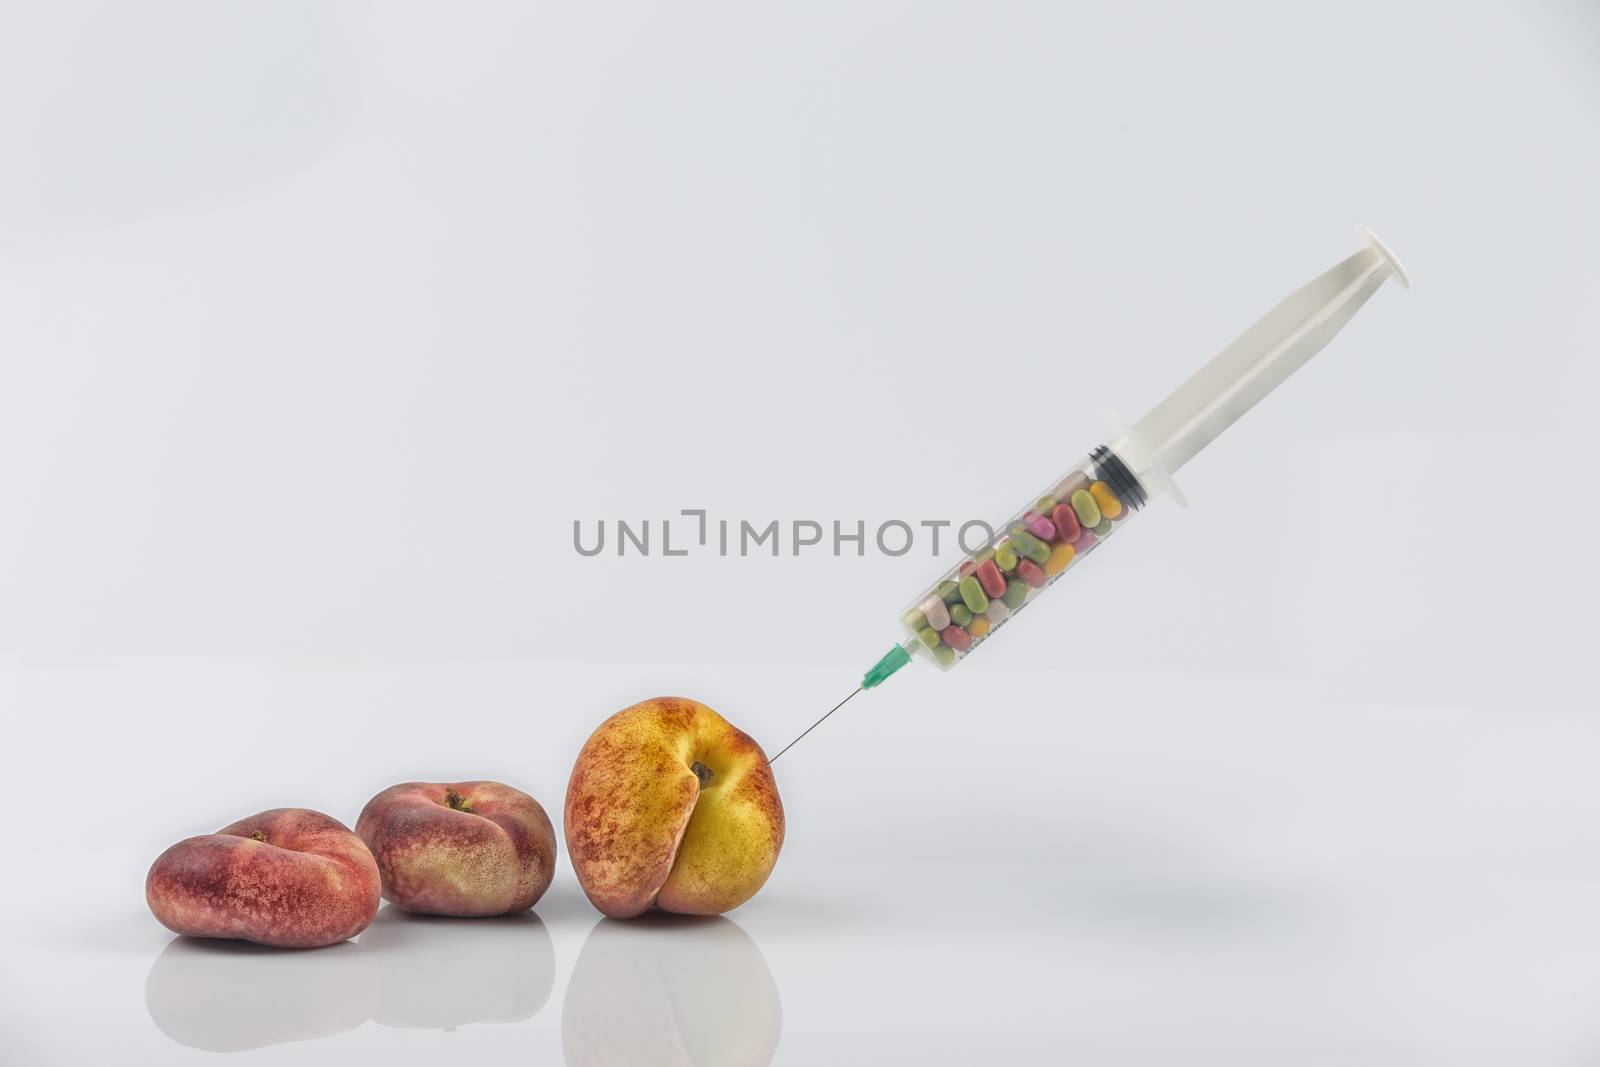 Female menopause and sexual disease metaphor: peaches and syringe with pills meaning cosmetic and health treatment for female ageing